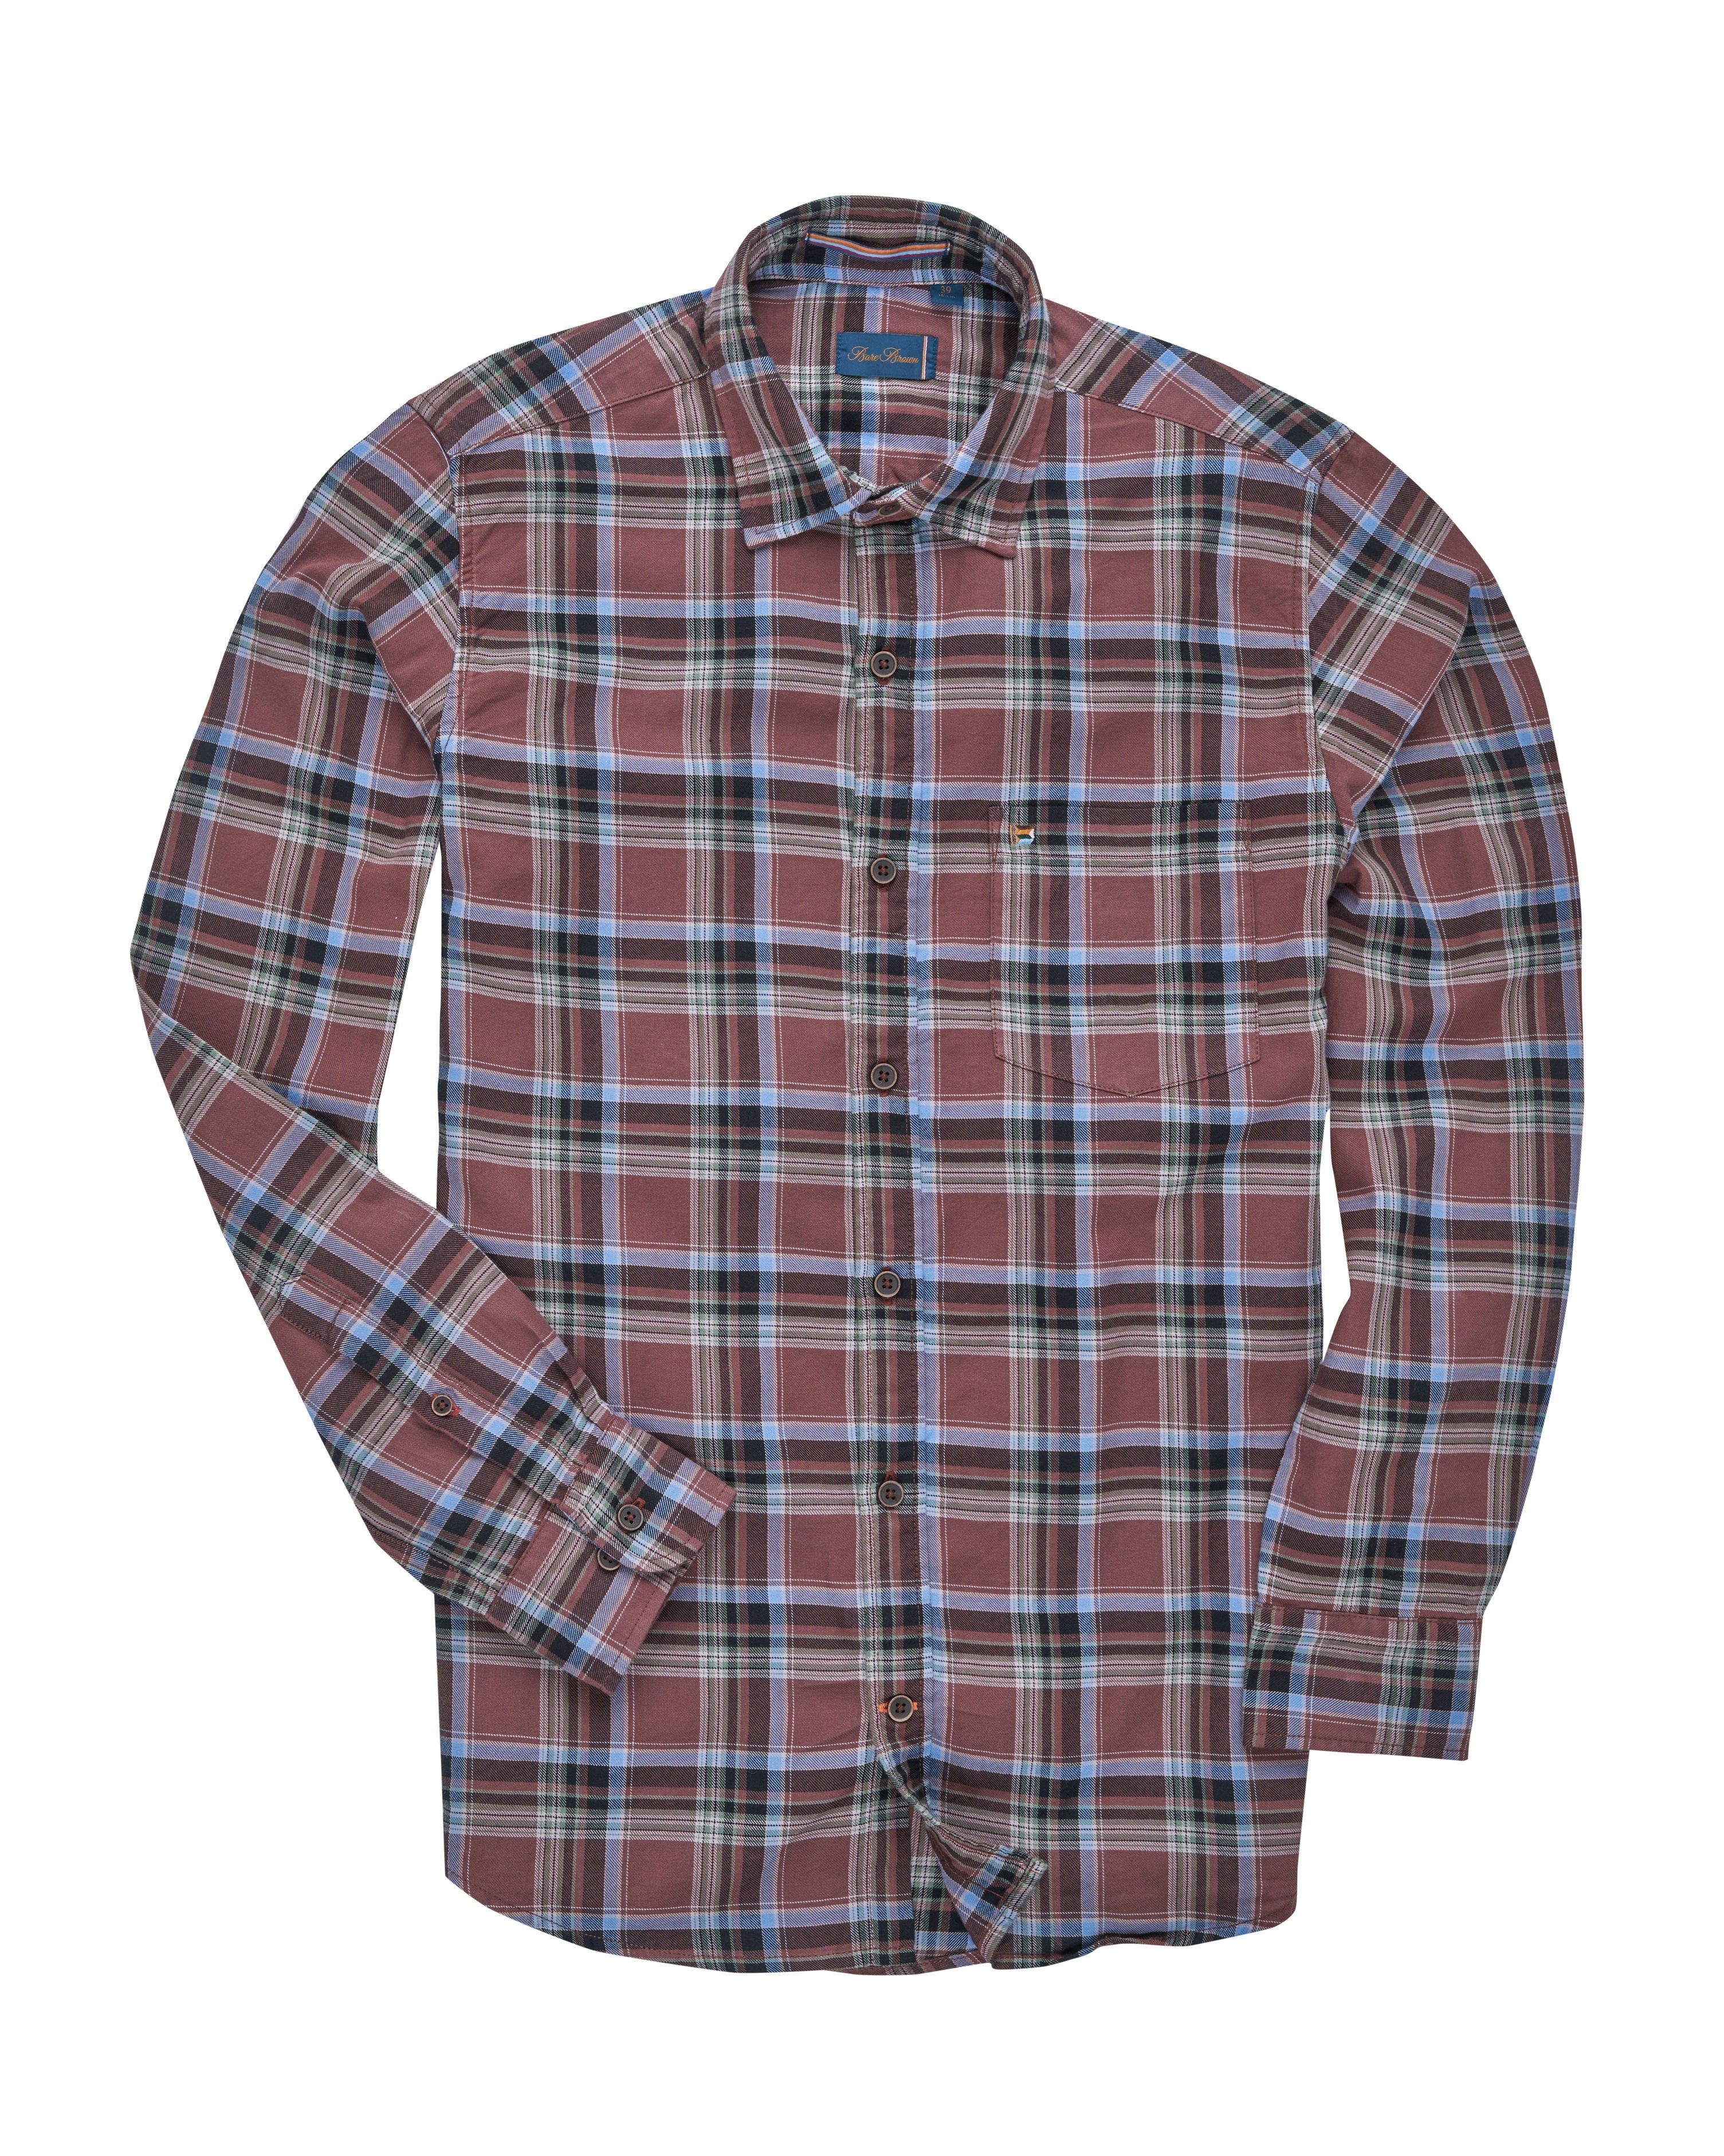 Bare Brown Cotton Check Shirt, Slim Fit with Full Sleeves - Light Brown